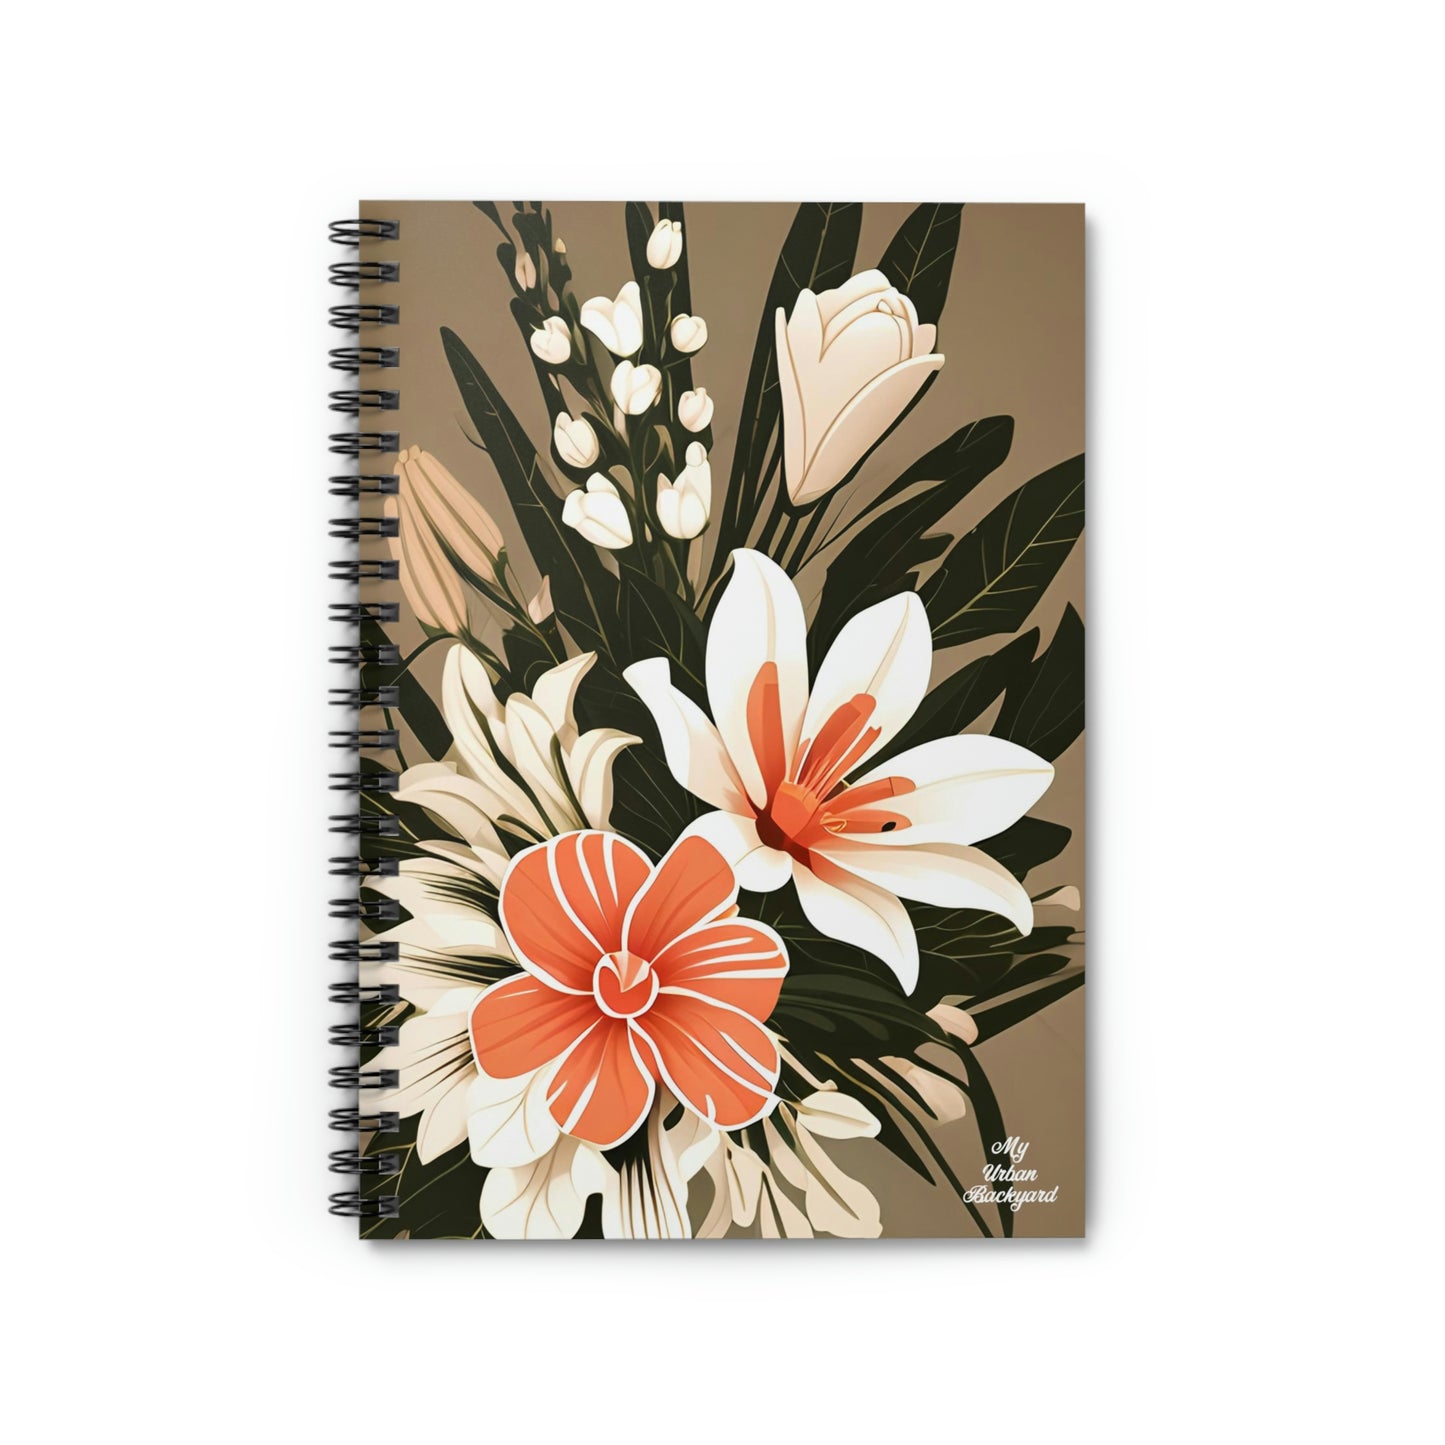 Bouquet of Flowers, Spiral Notebook Journal - Write in Style